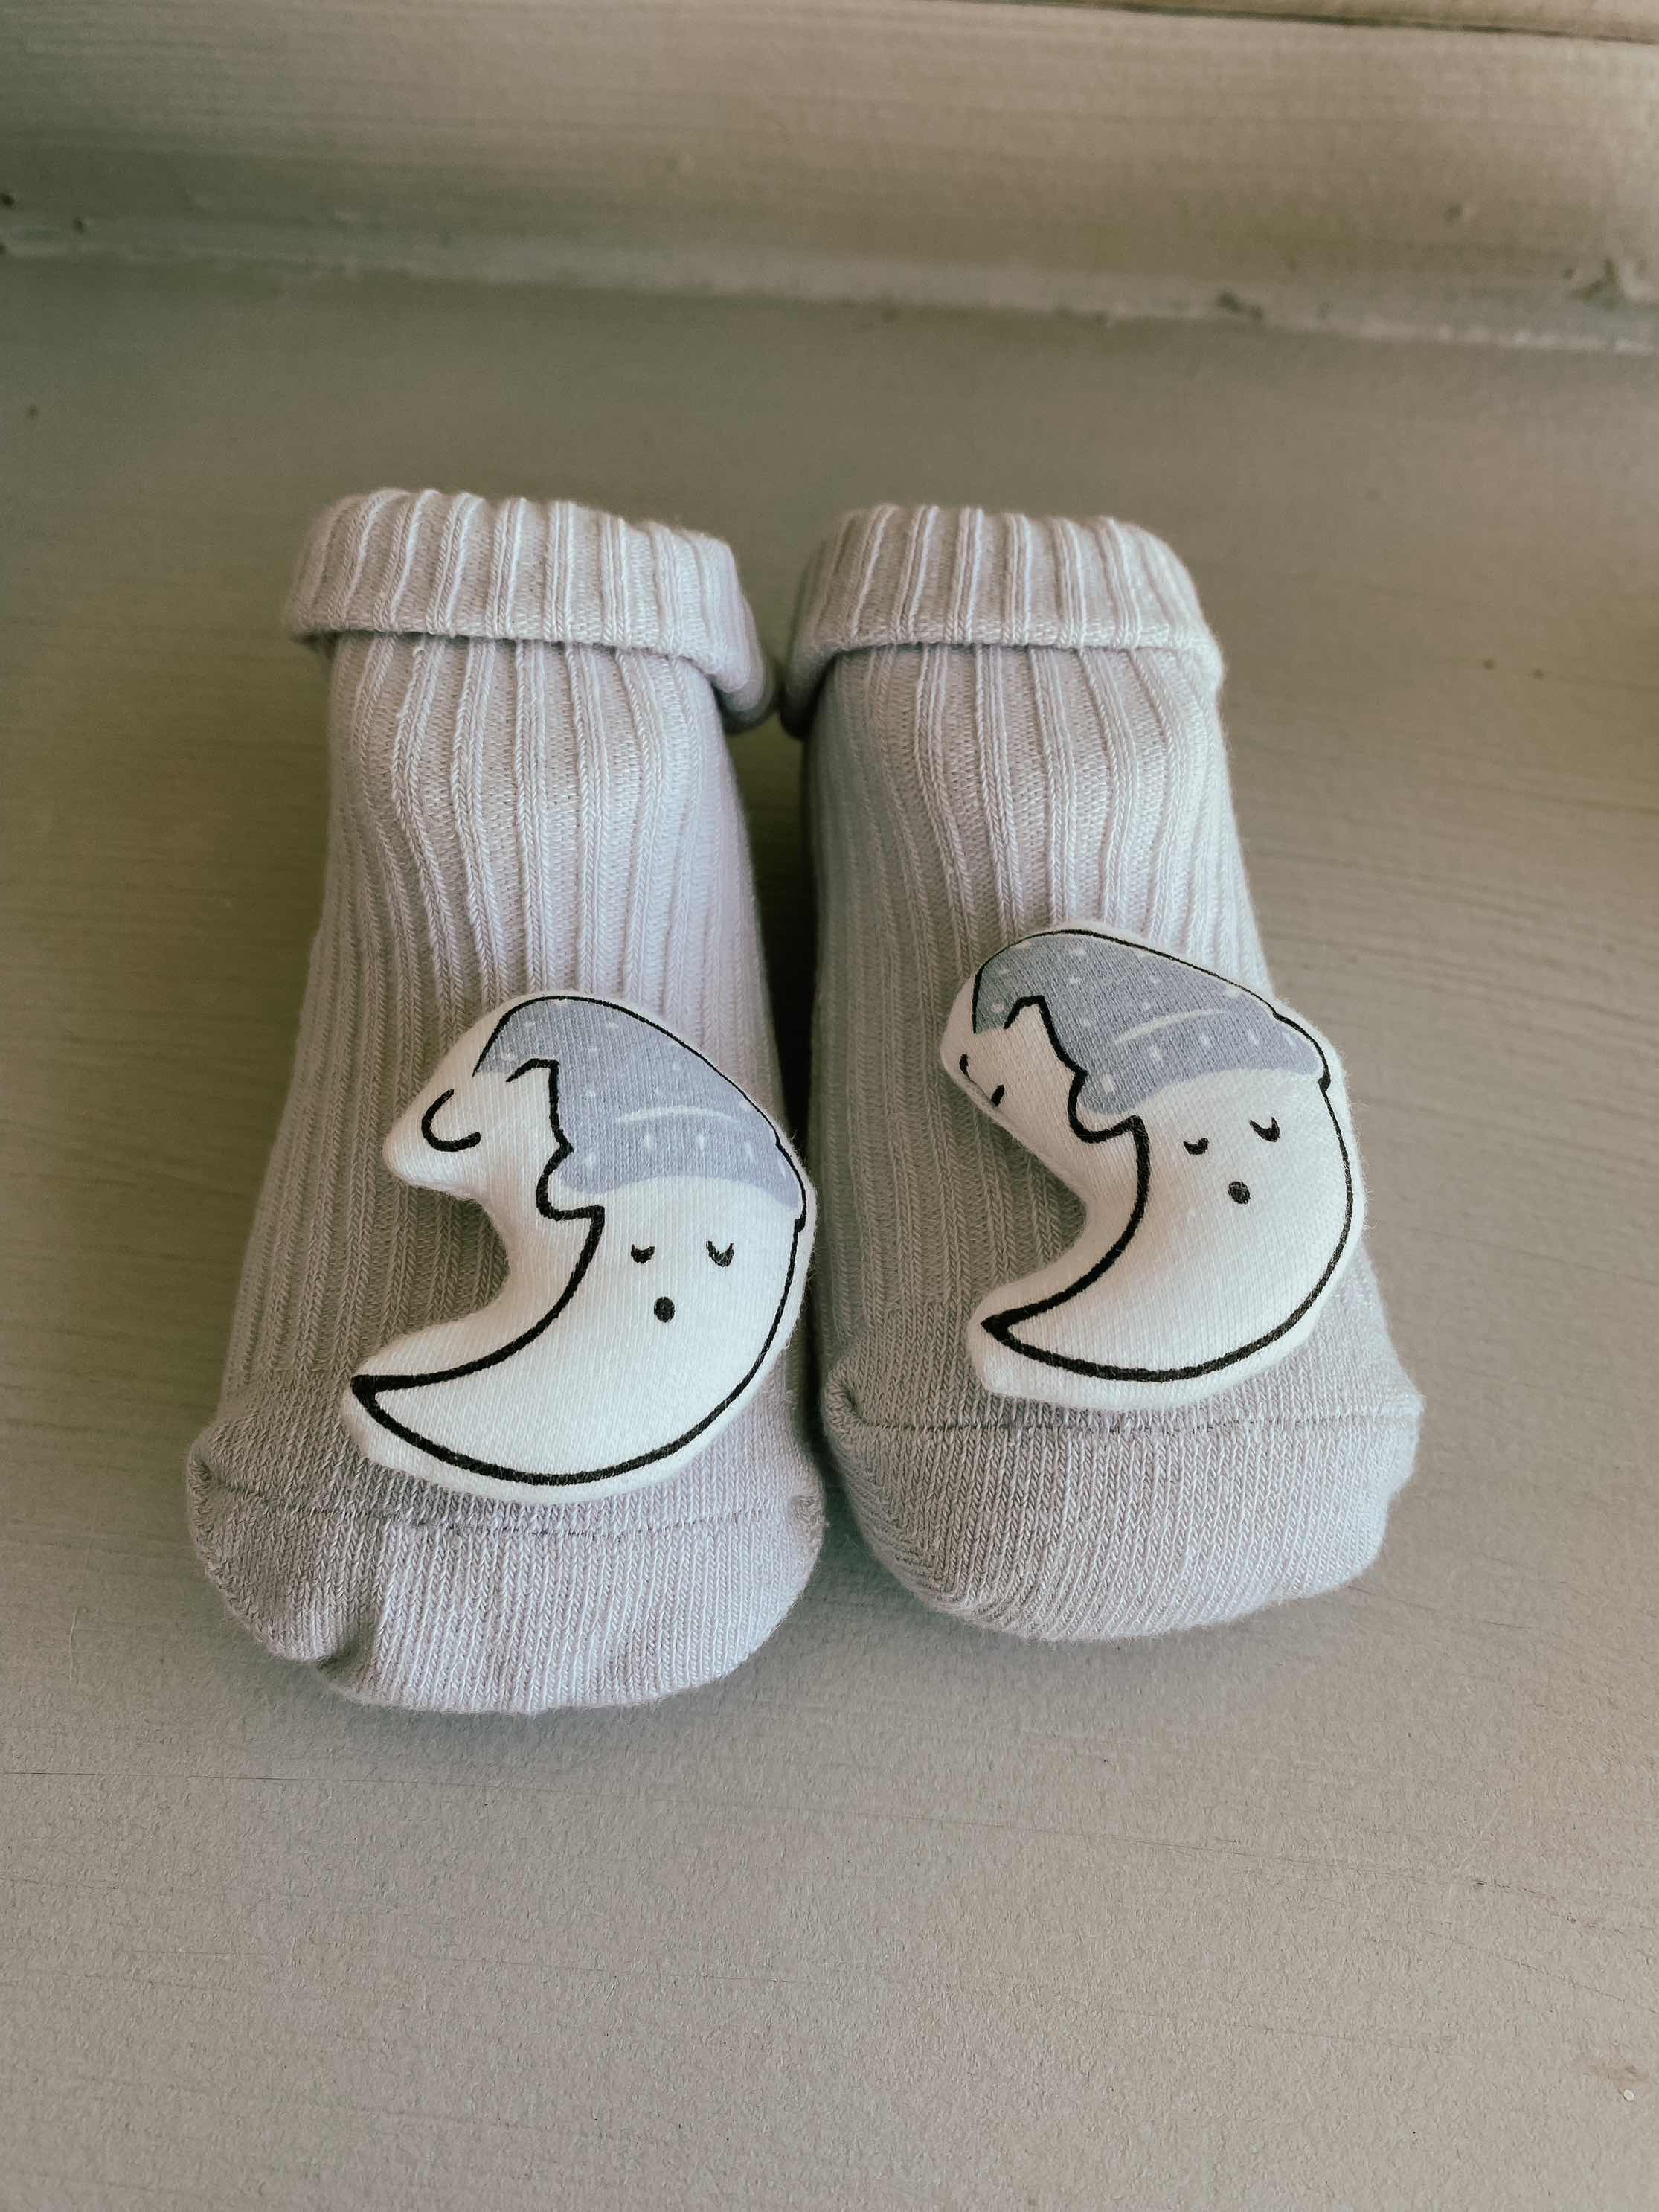 Display of baby sock slippers with a moon image on toes